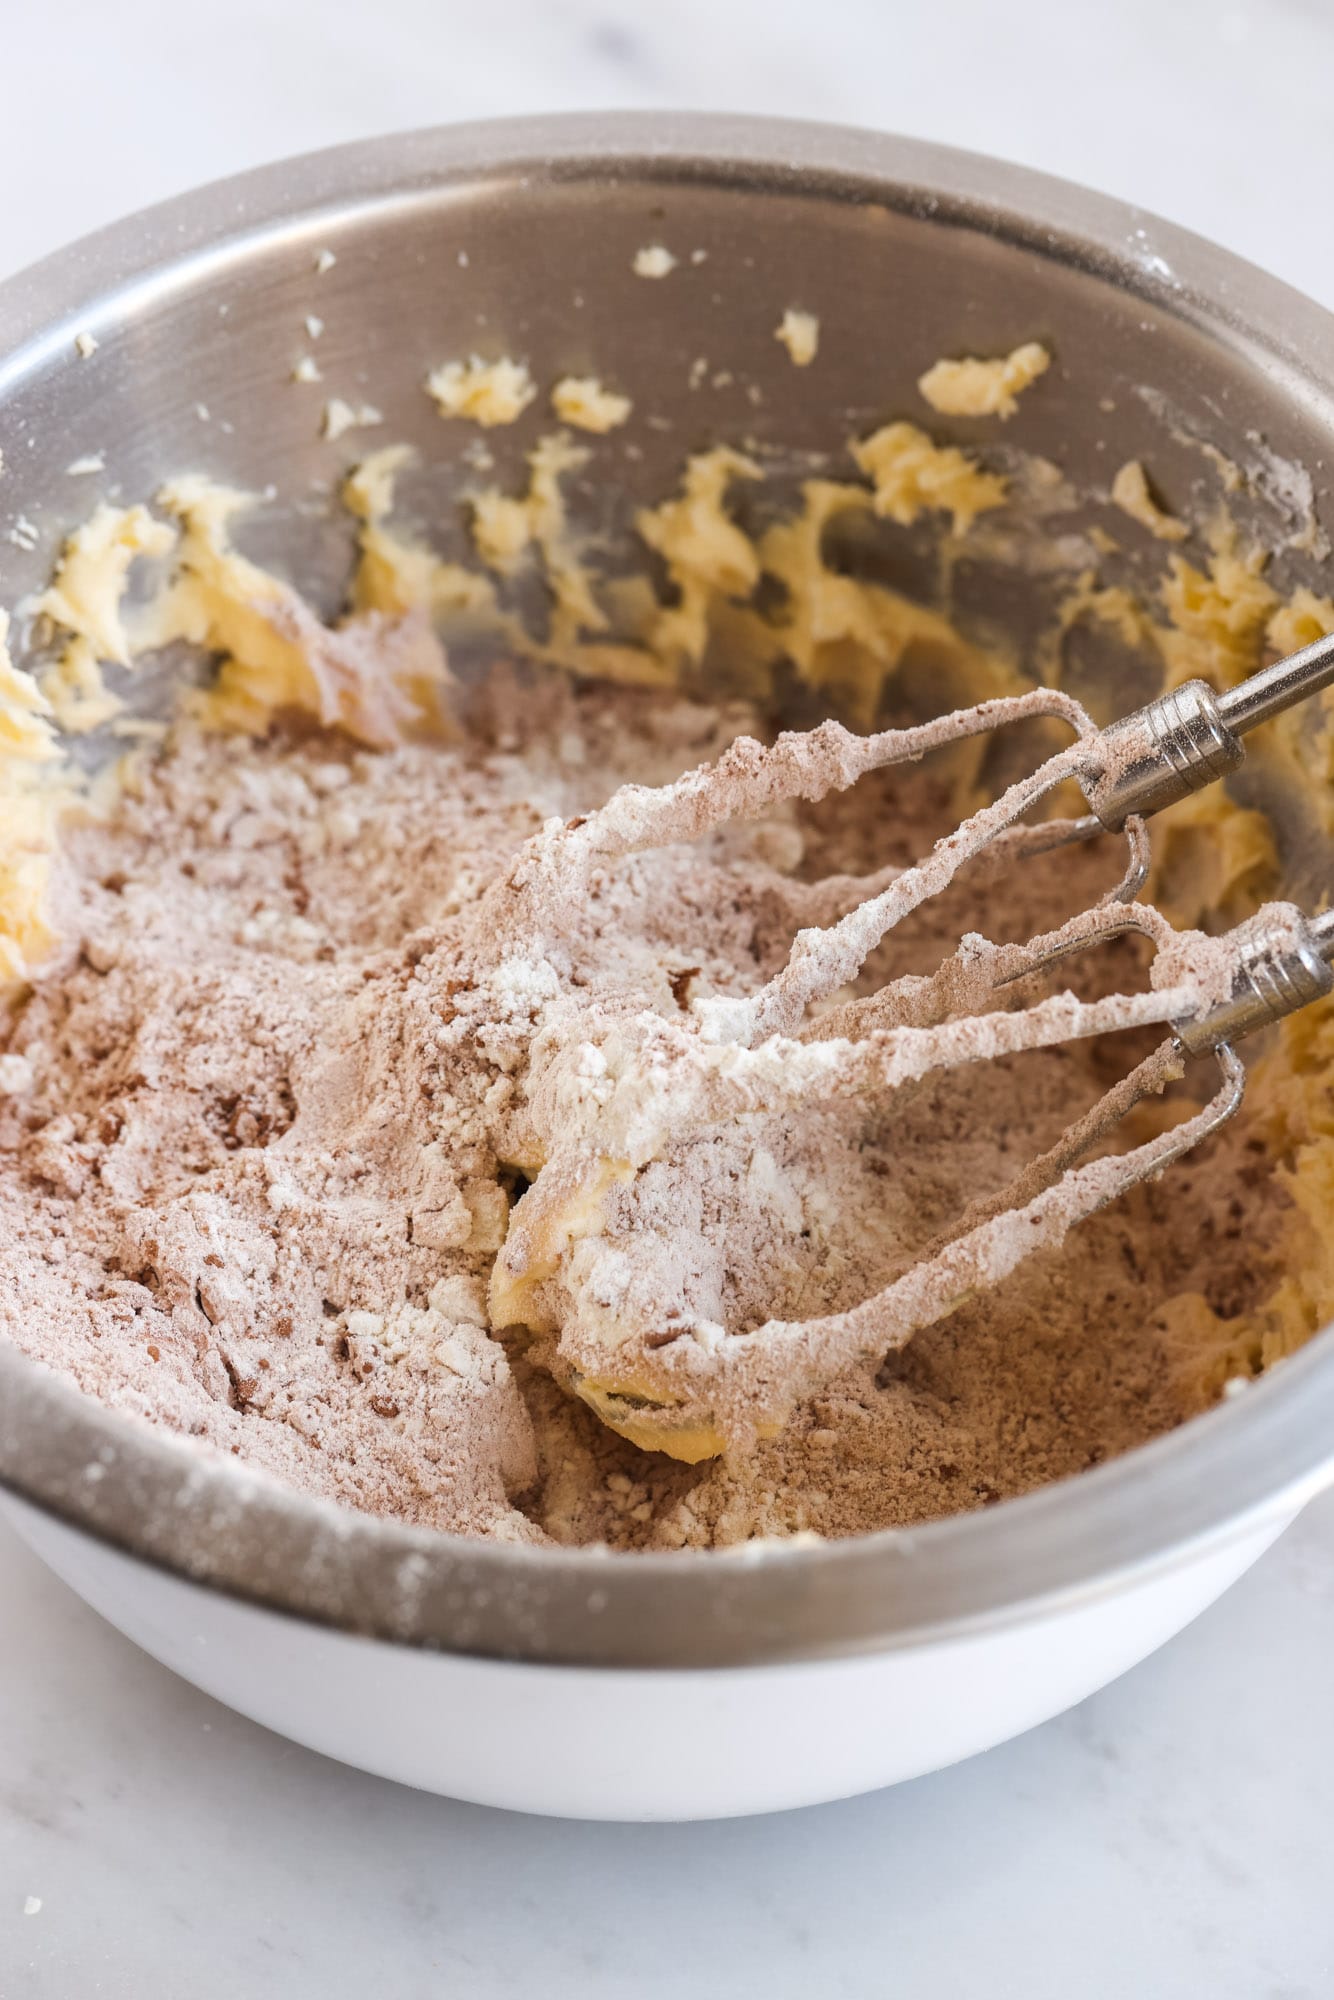 In a mixing bowl, dry ingredients are added to creamed butter also shown mixer beaters on the side